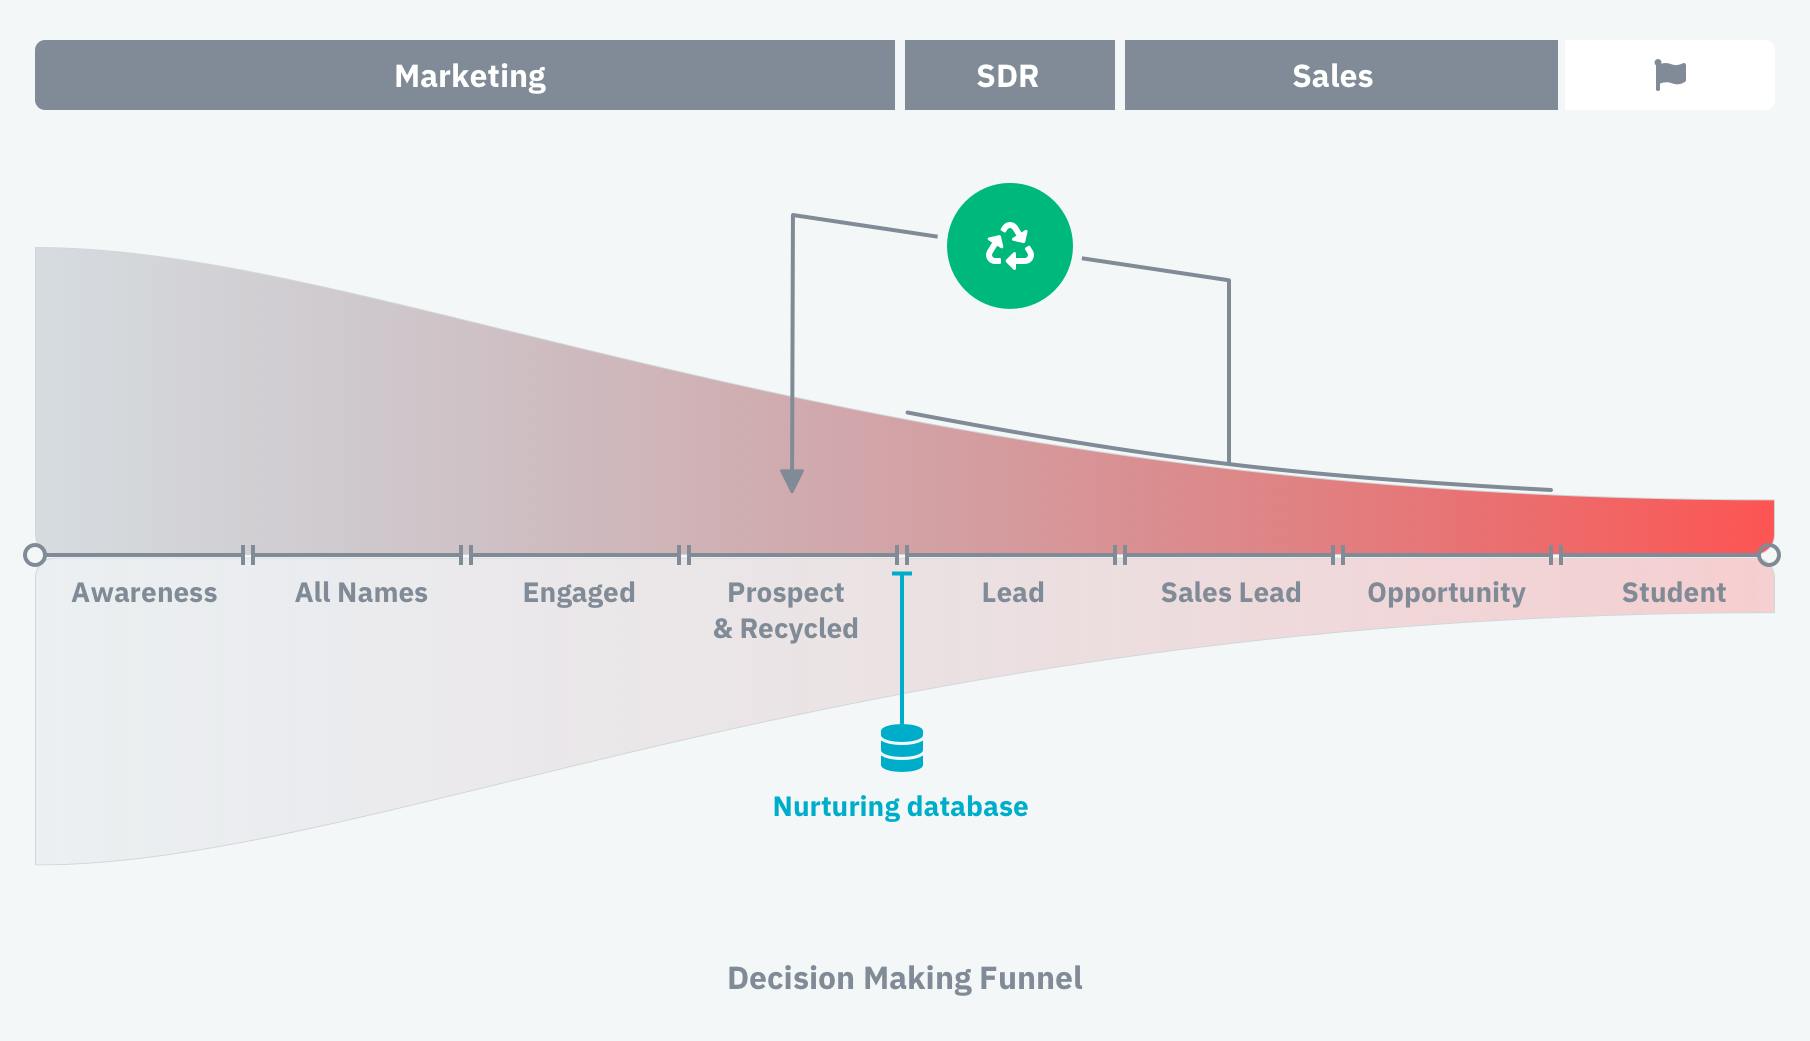 The Decision-Making Funnel